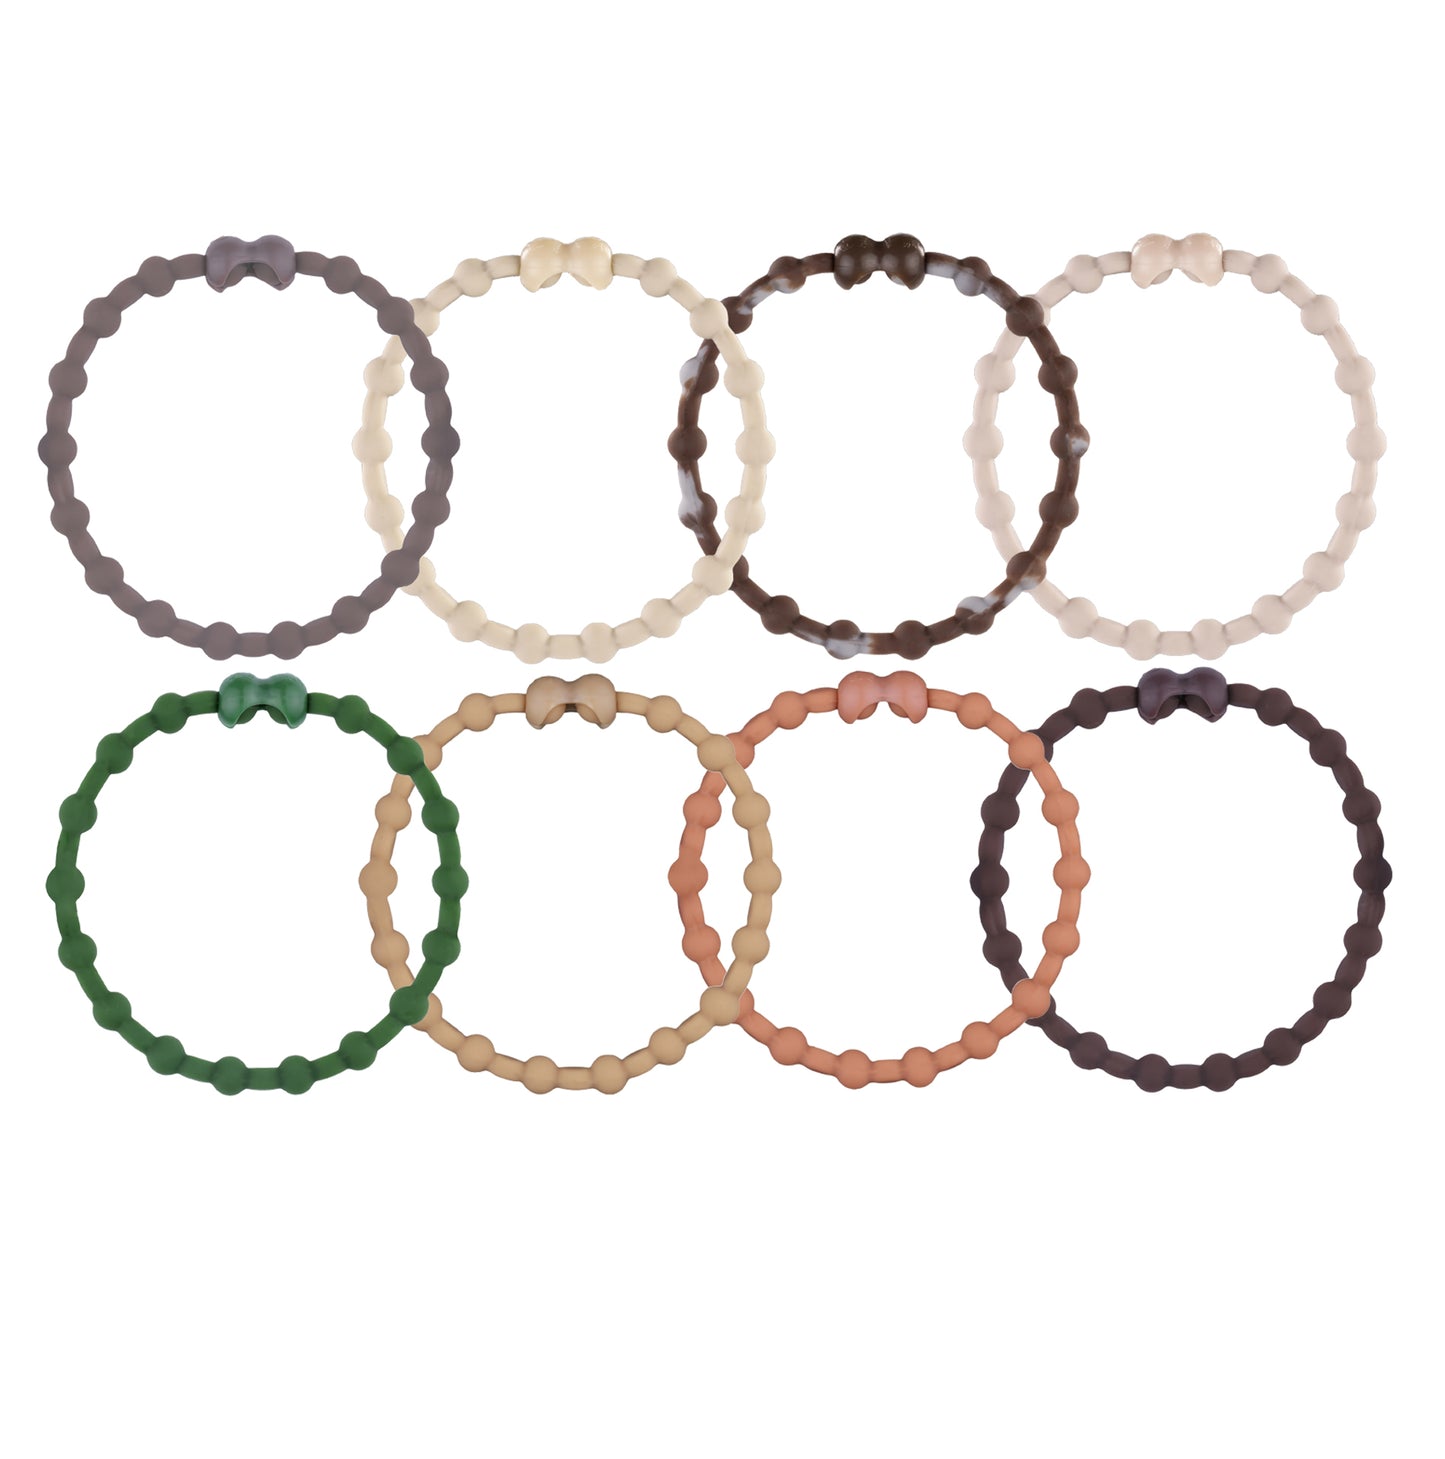 Desert Mirage Pack Hair Ties (8 Pack): Tame Your Mane and Conquer Workouts in Style